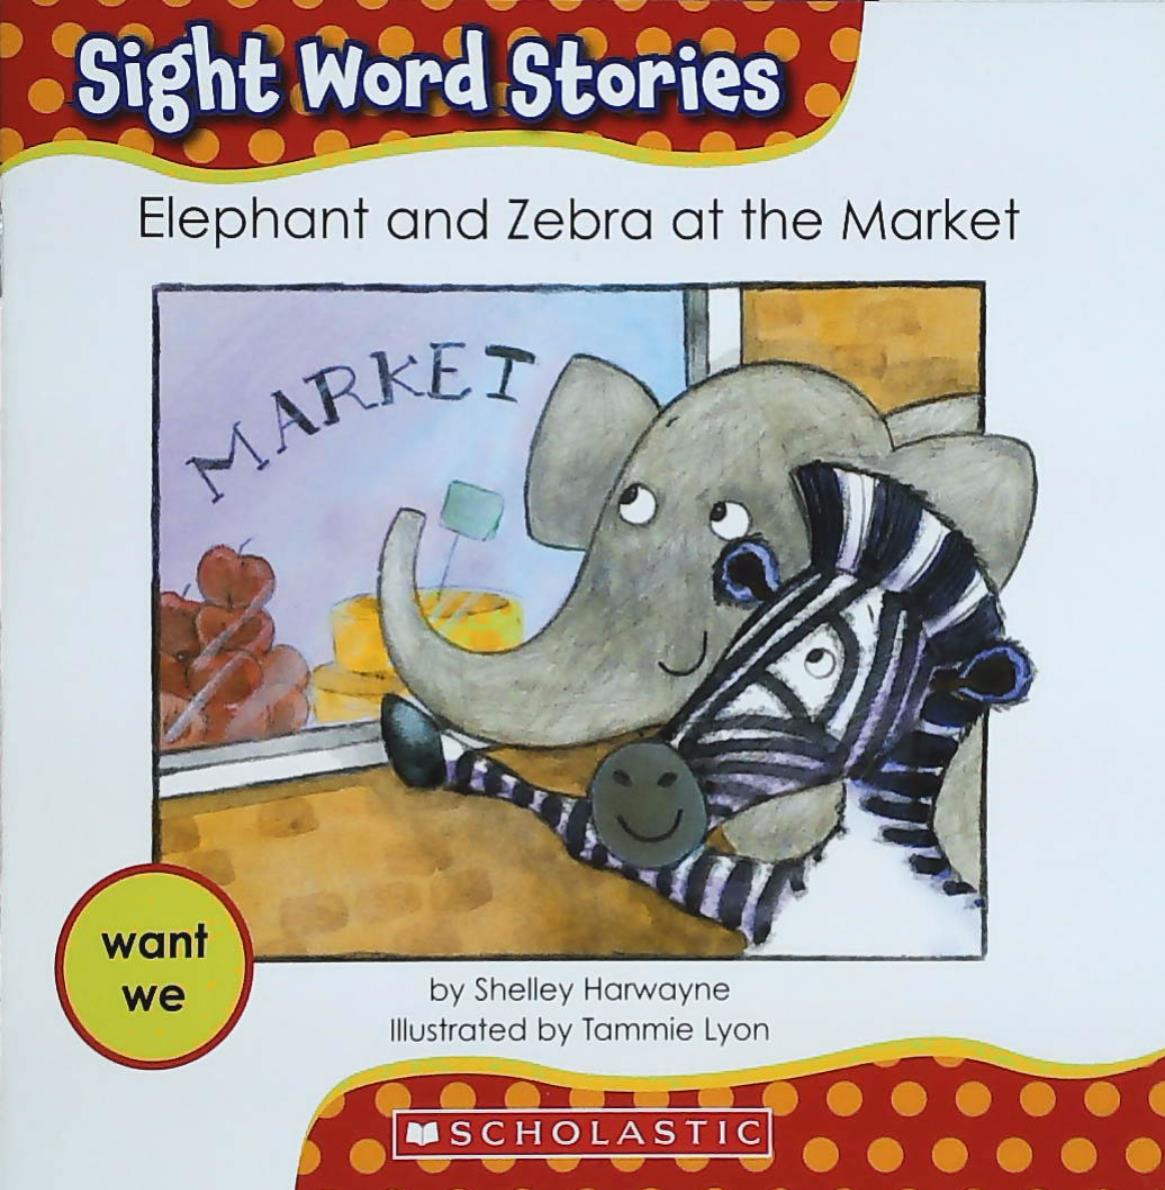 Livre ISBN 054516785X Sight Word Stories : Elephant and Zebra at the Market (Shelley Harwayne)